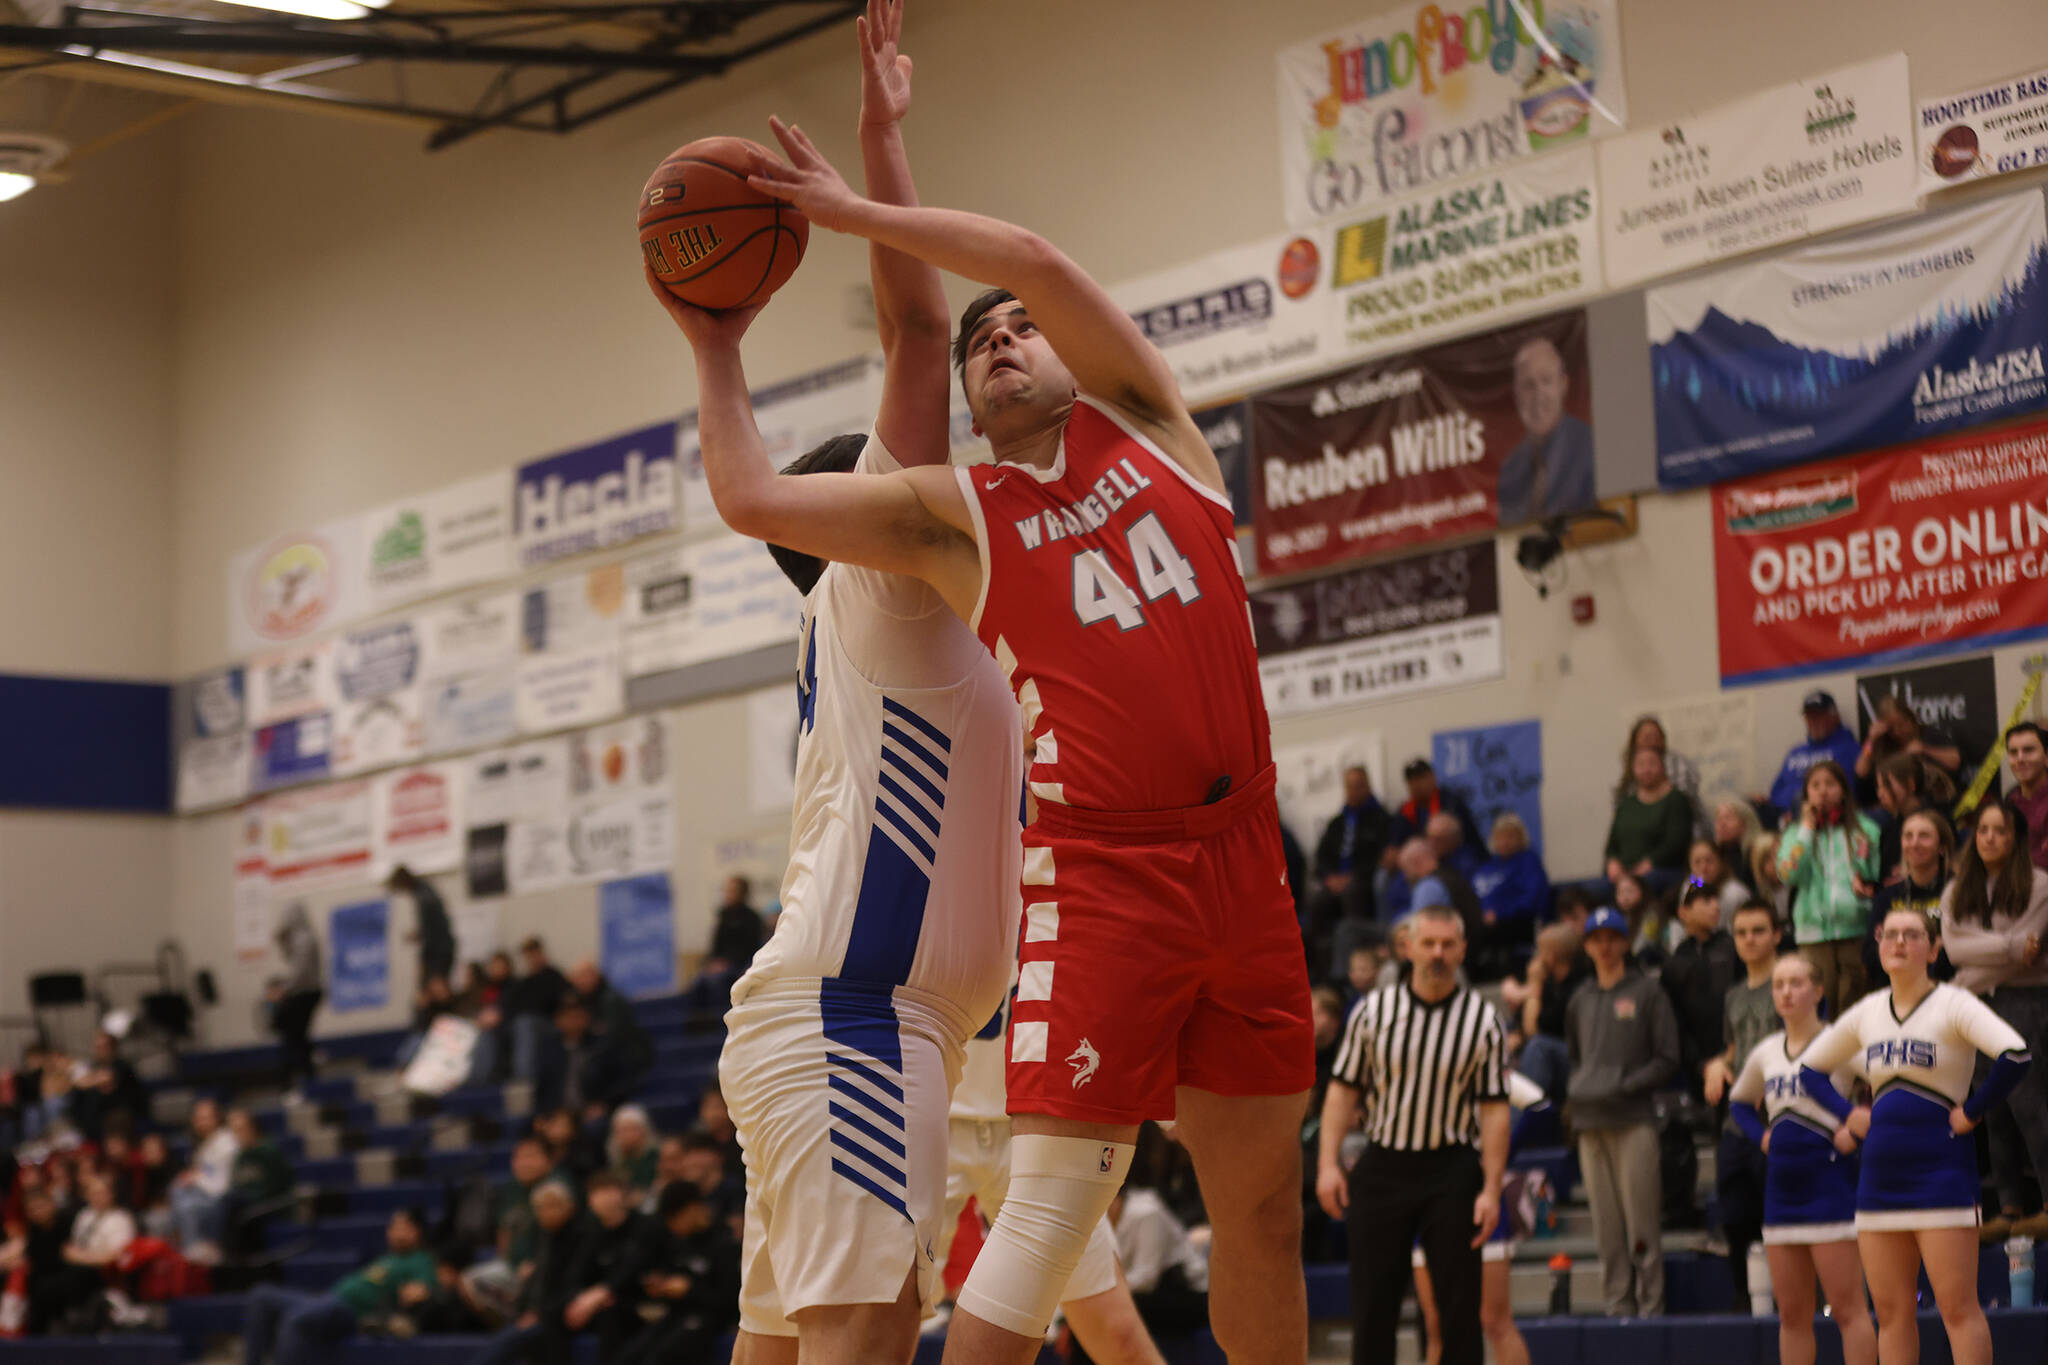 Wrangell senior Leroy Wynne (44) works around his defender to take a shot at the hoop in the first half of a Region V loss to Petersburg. The game was the latest close contest in one of the region’s oldest rivalries. (Ben Hohenstatt / Juneau Empire)